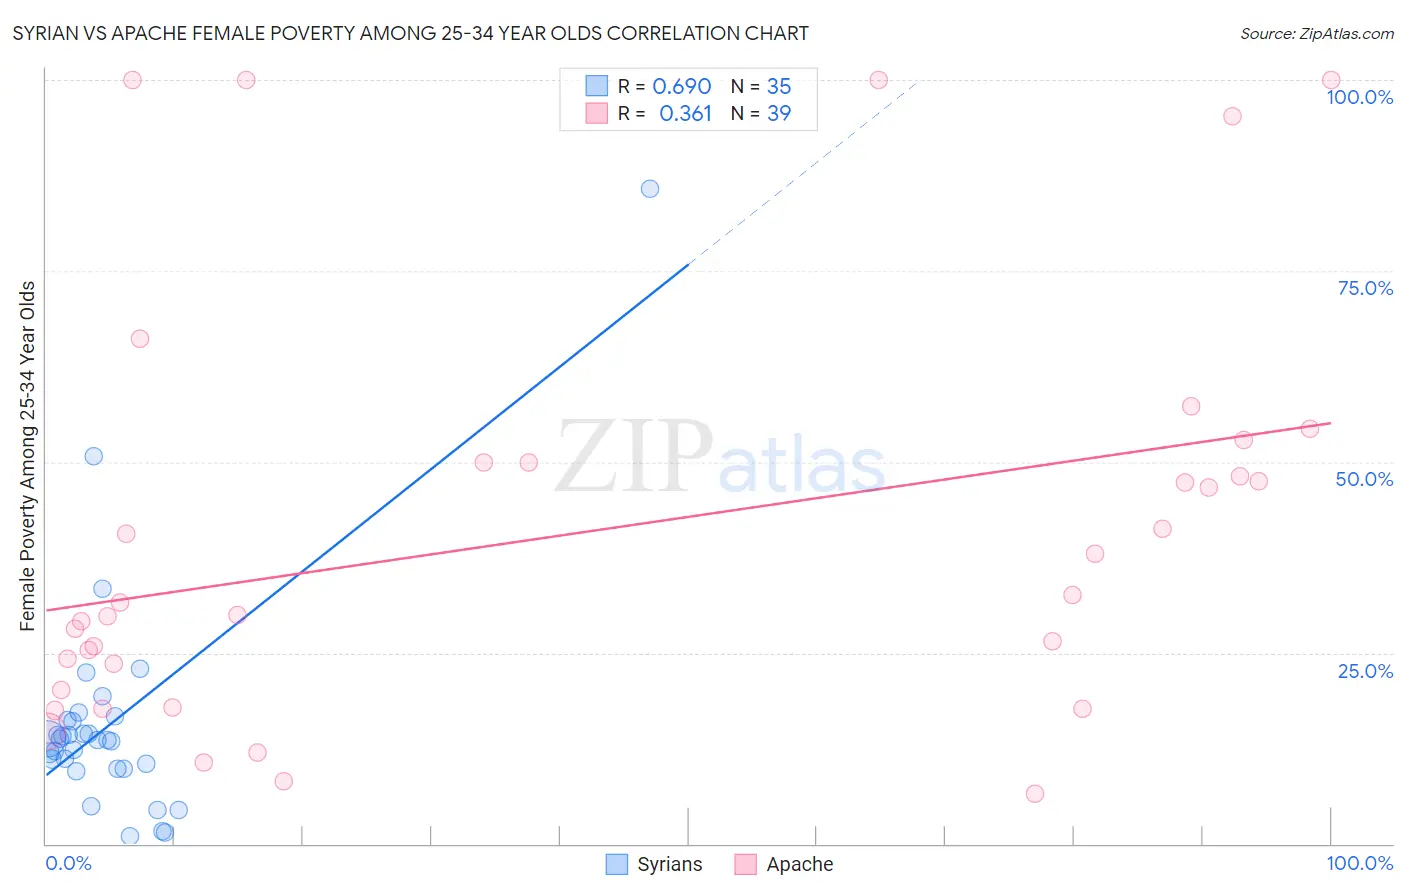 Syrian vs Apache Female Poverty Among 25-34 Year Olds